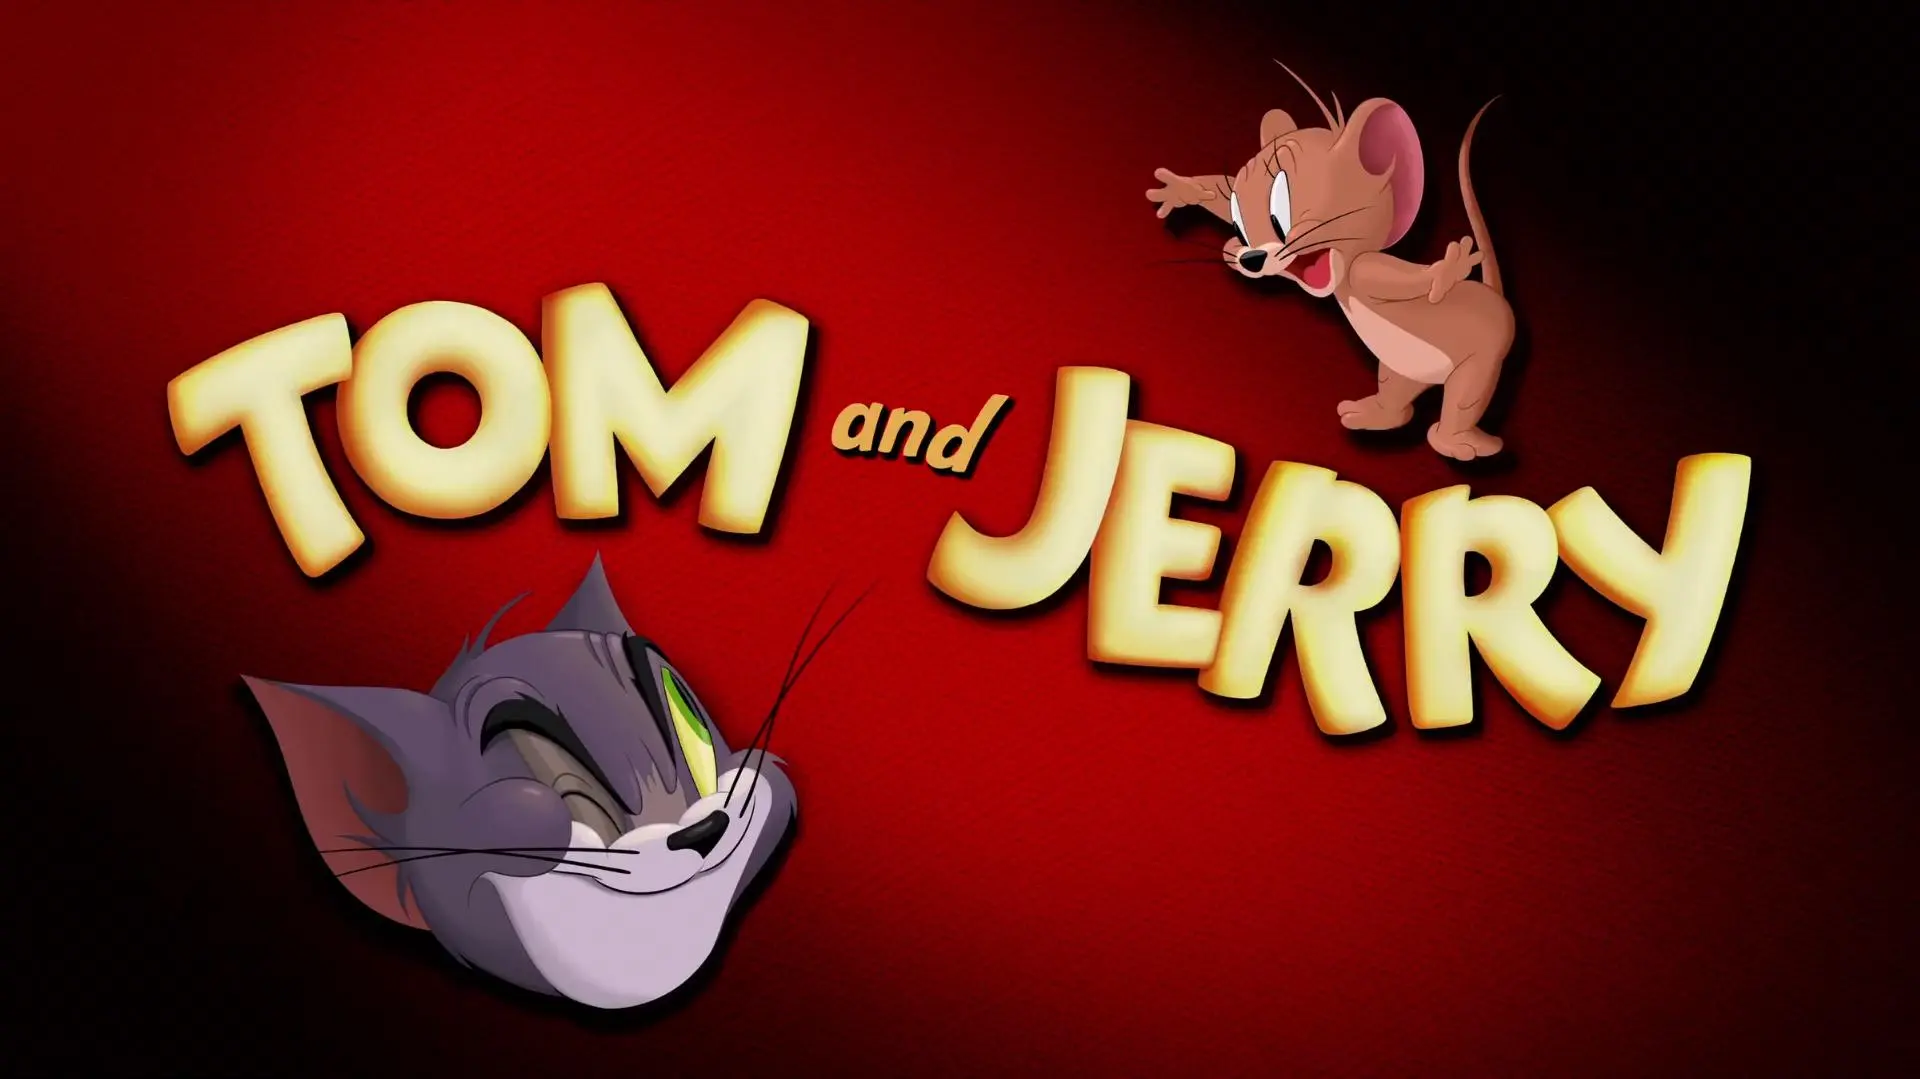 Tom and Jerry Special Shorts_peliplat